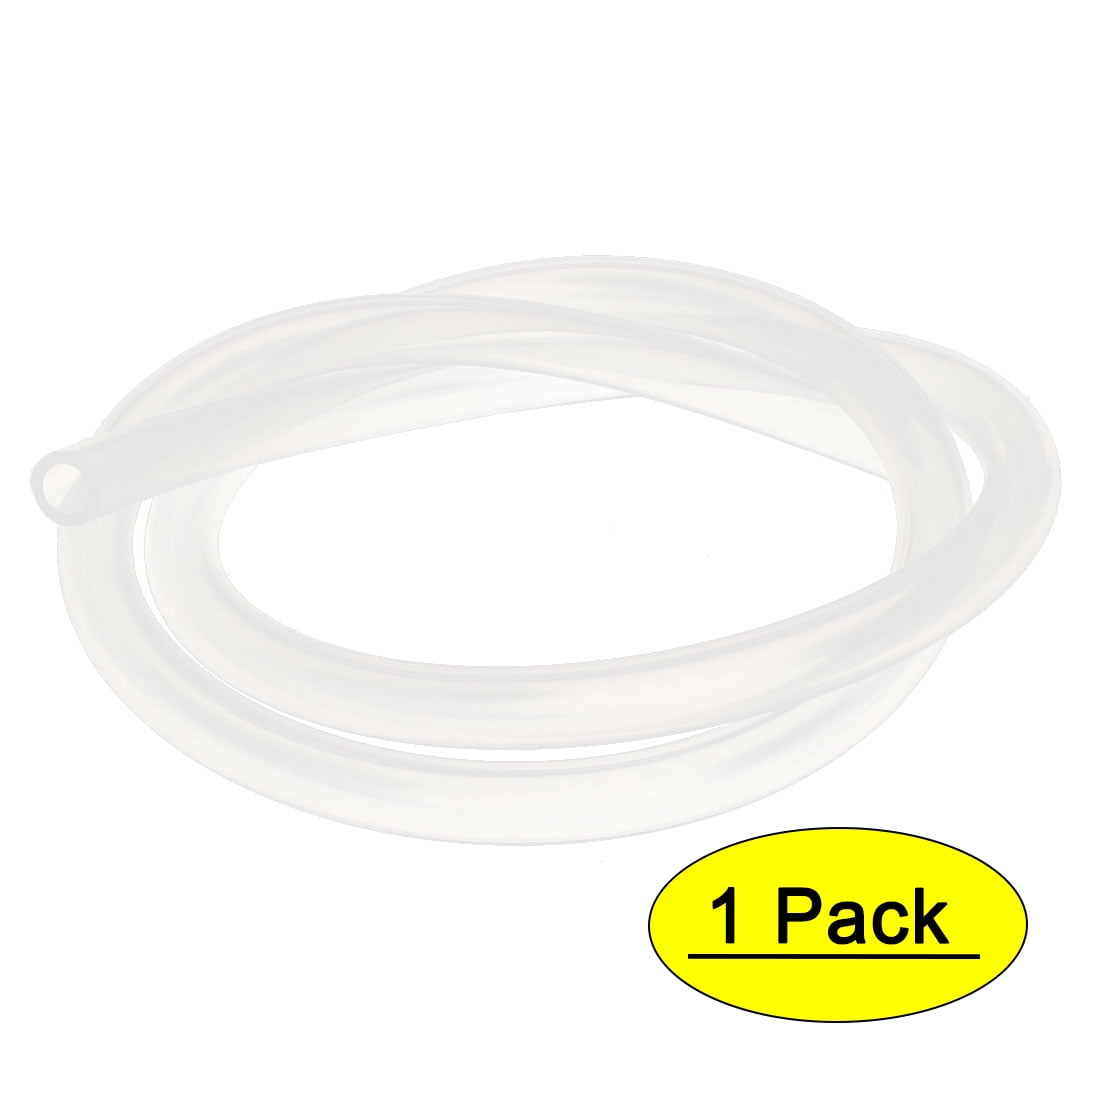 5mm ID x 7mm OD 5ft Rubber Tube Clear Silicone Tubing